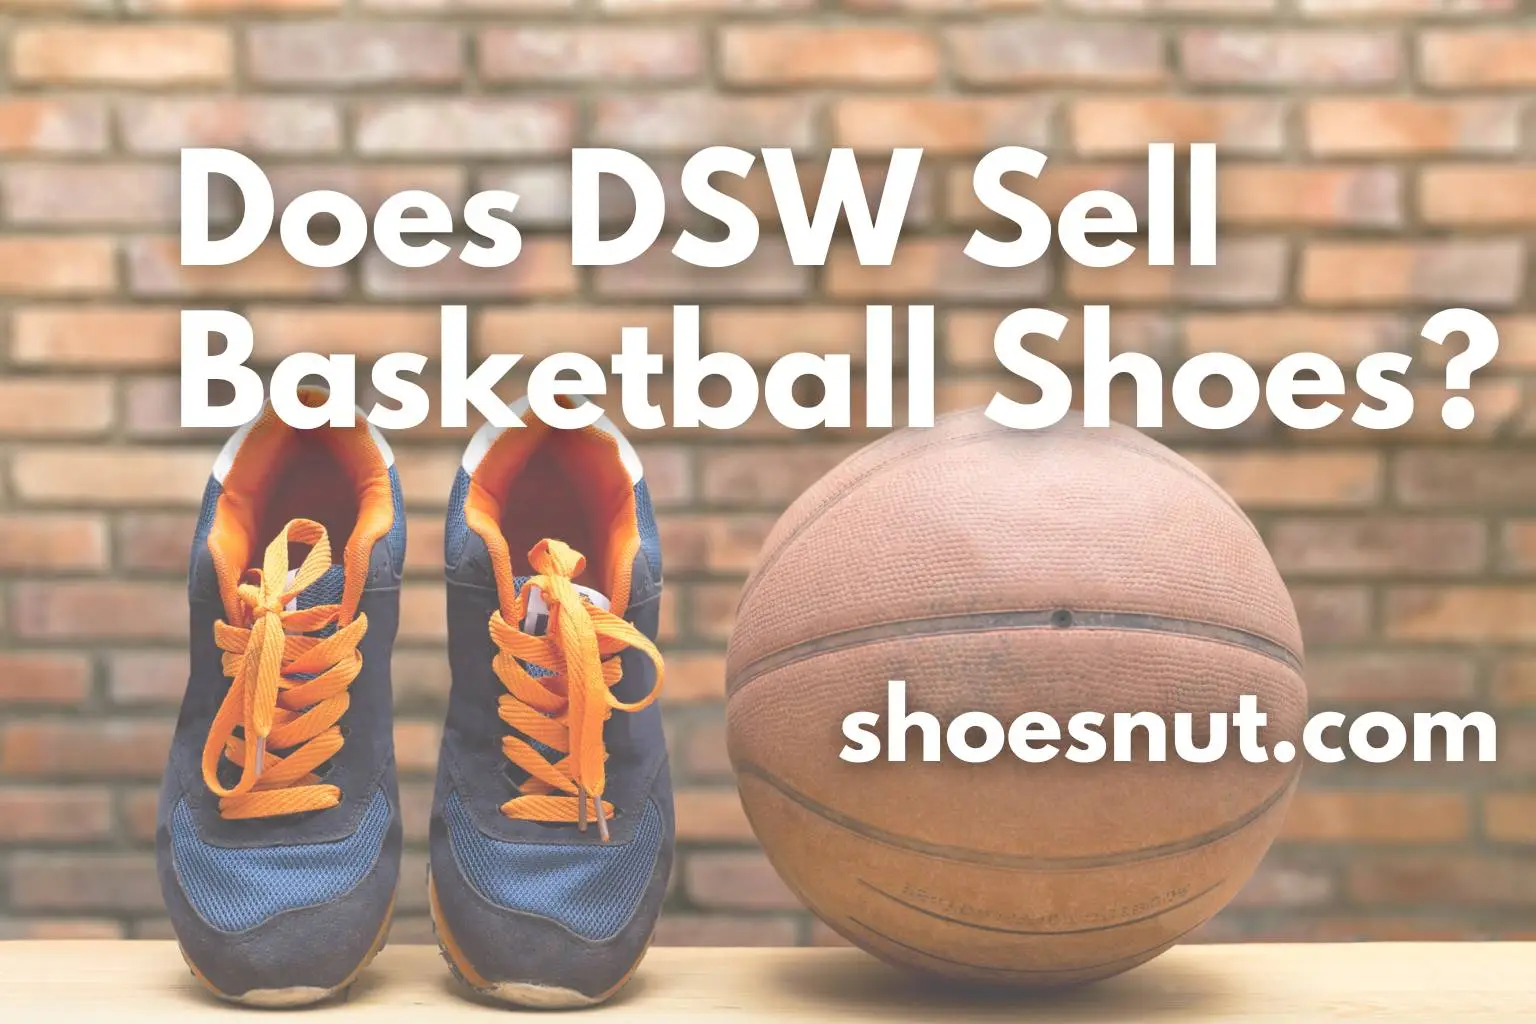 Does DSW Sell Basketball Shoes?